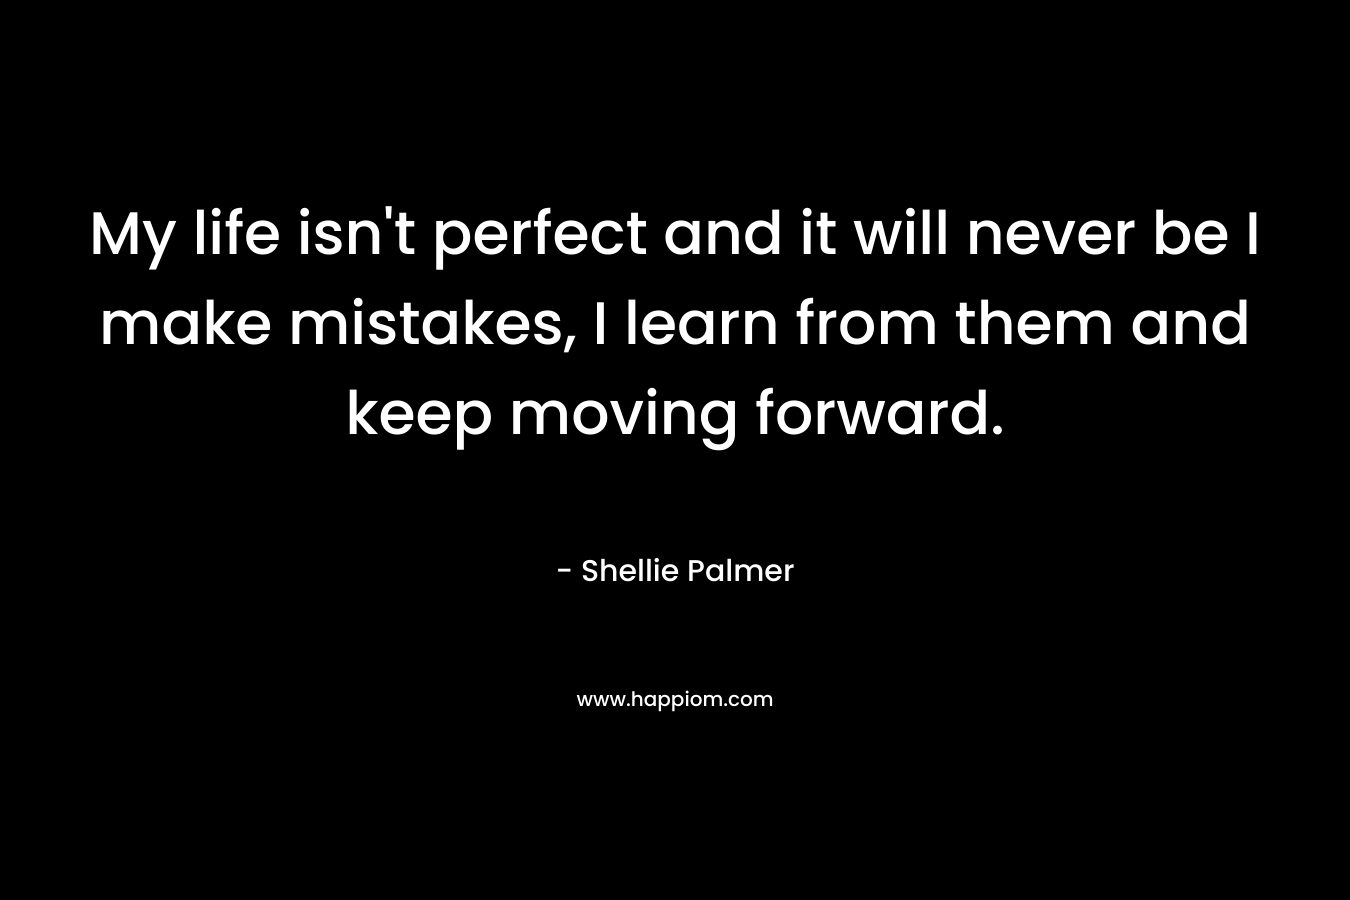 My life isn’t perfect and it will never be I make mistakes, I learn from them and keep moving forward. – Shellie Palmer